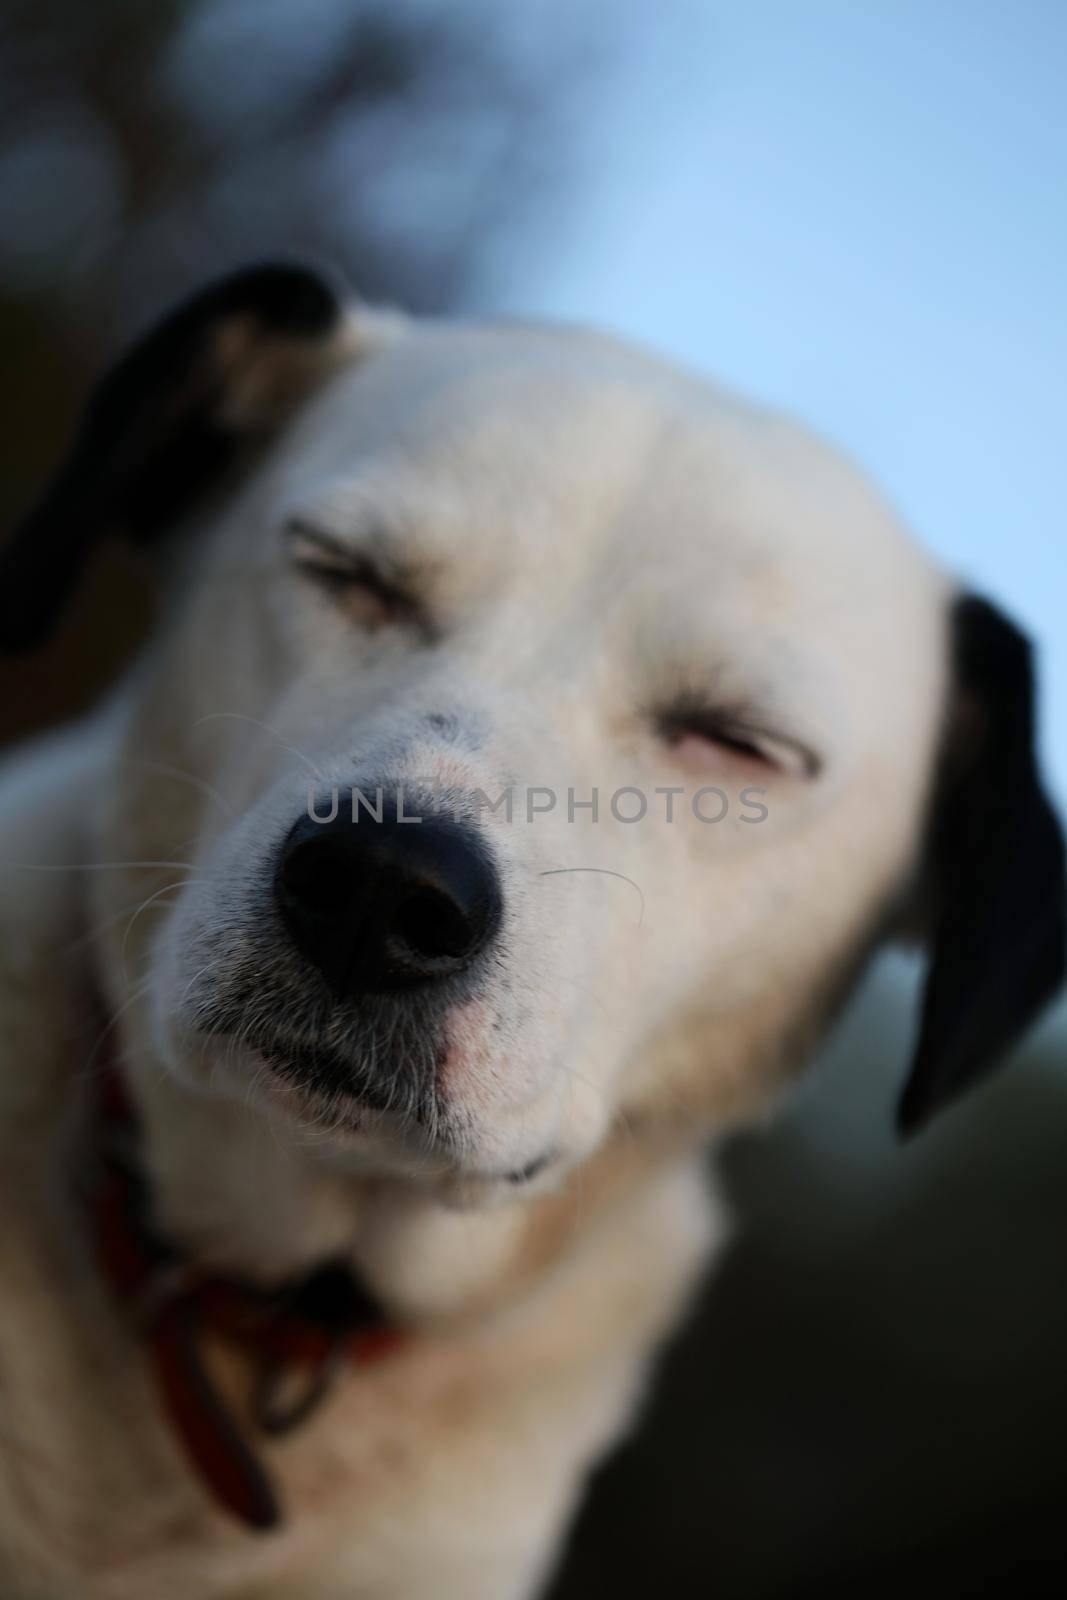 Cute white and black dog profile close up animal background high quality big size instant print by BakalaeroZz